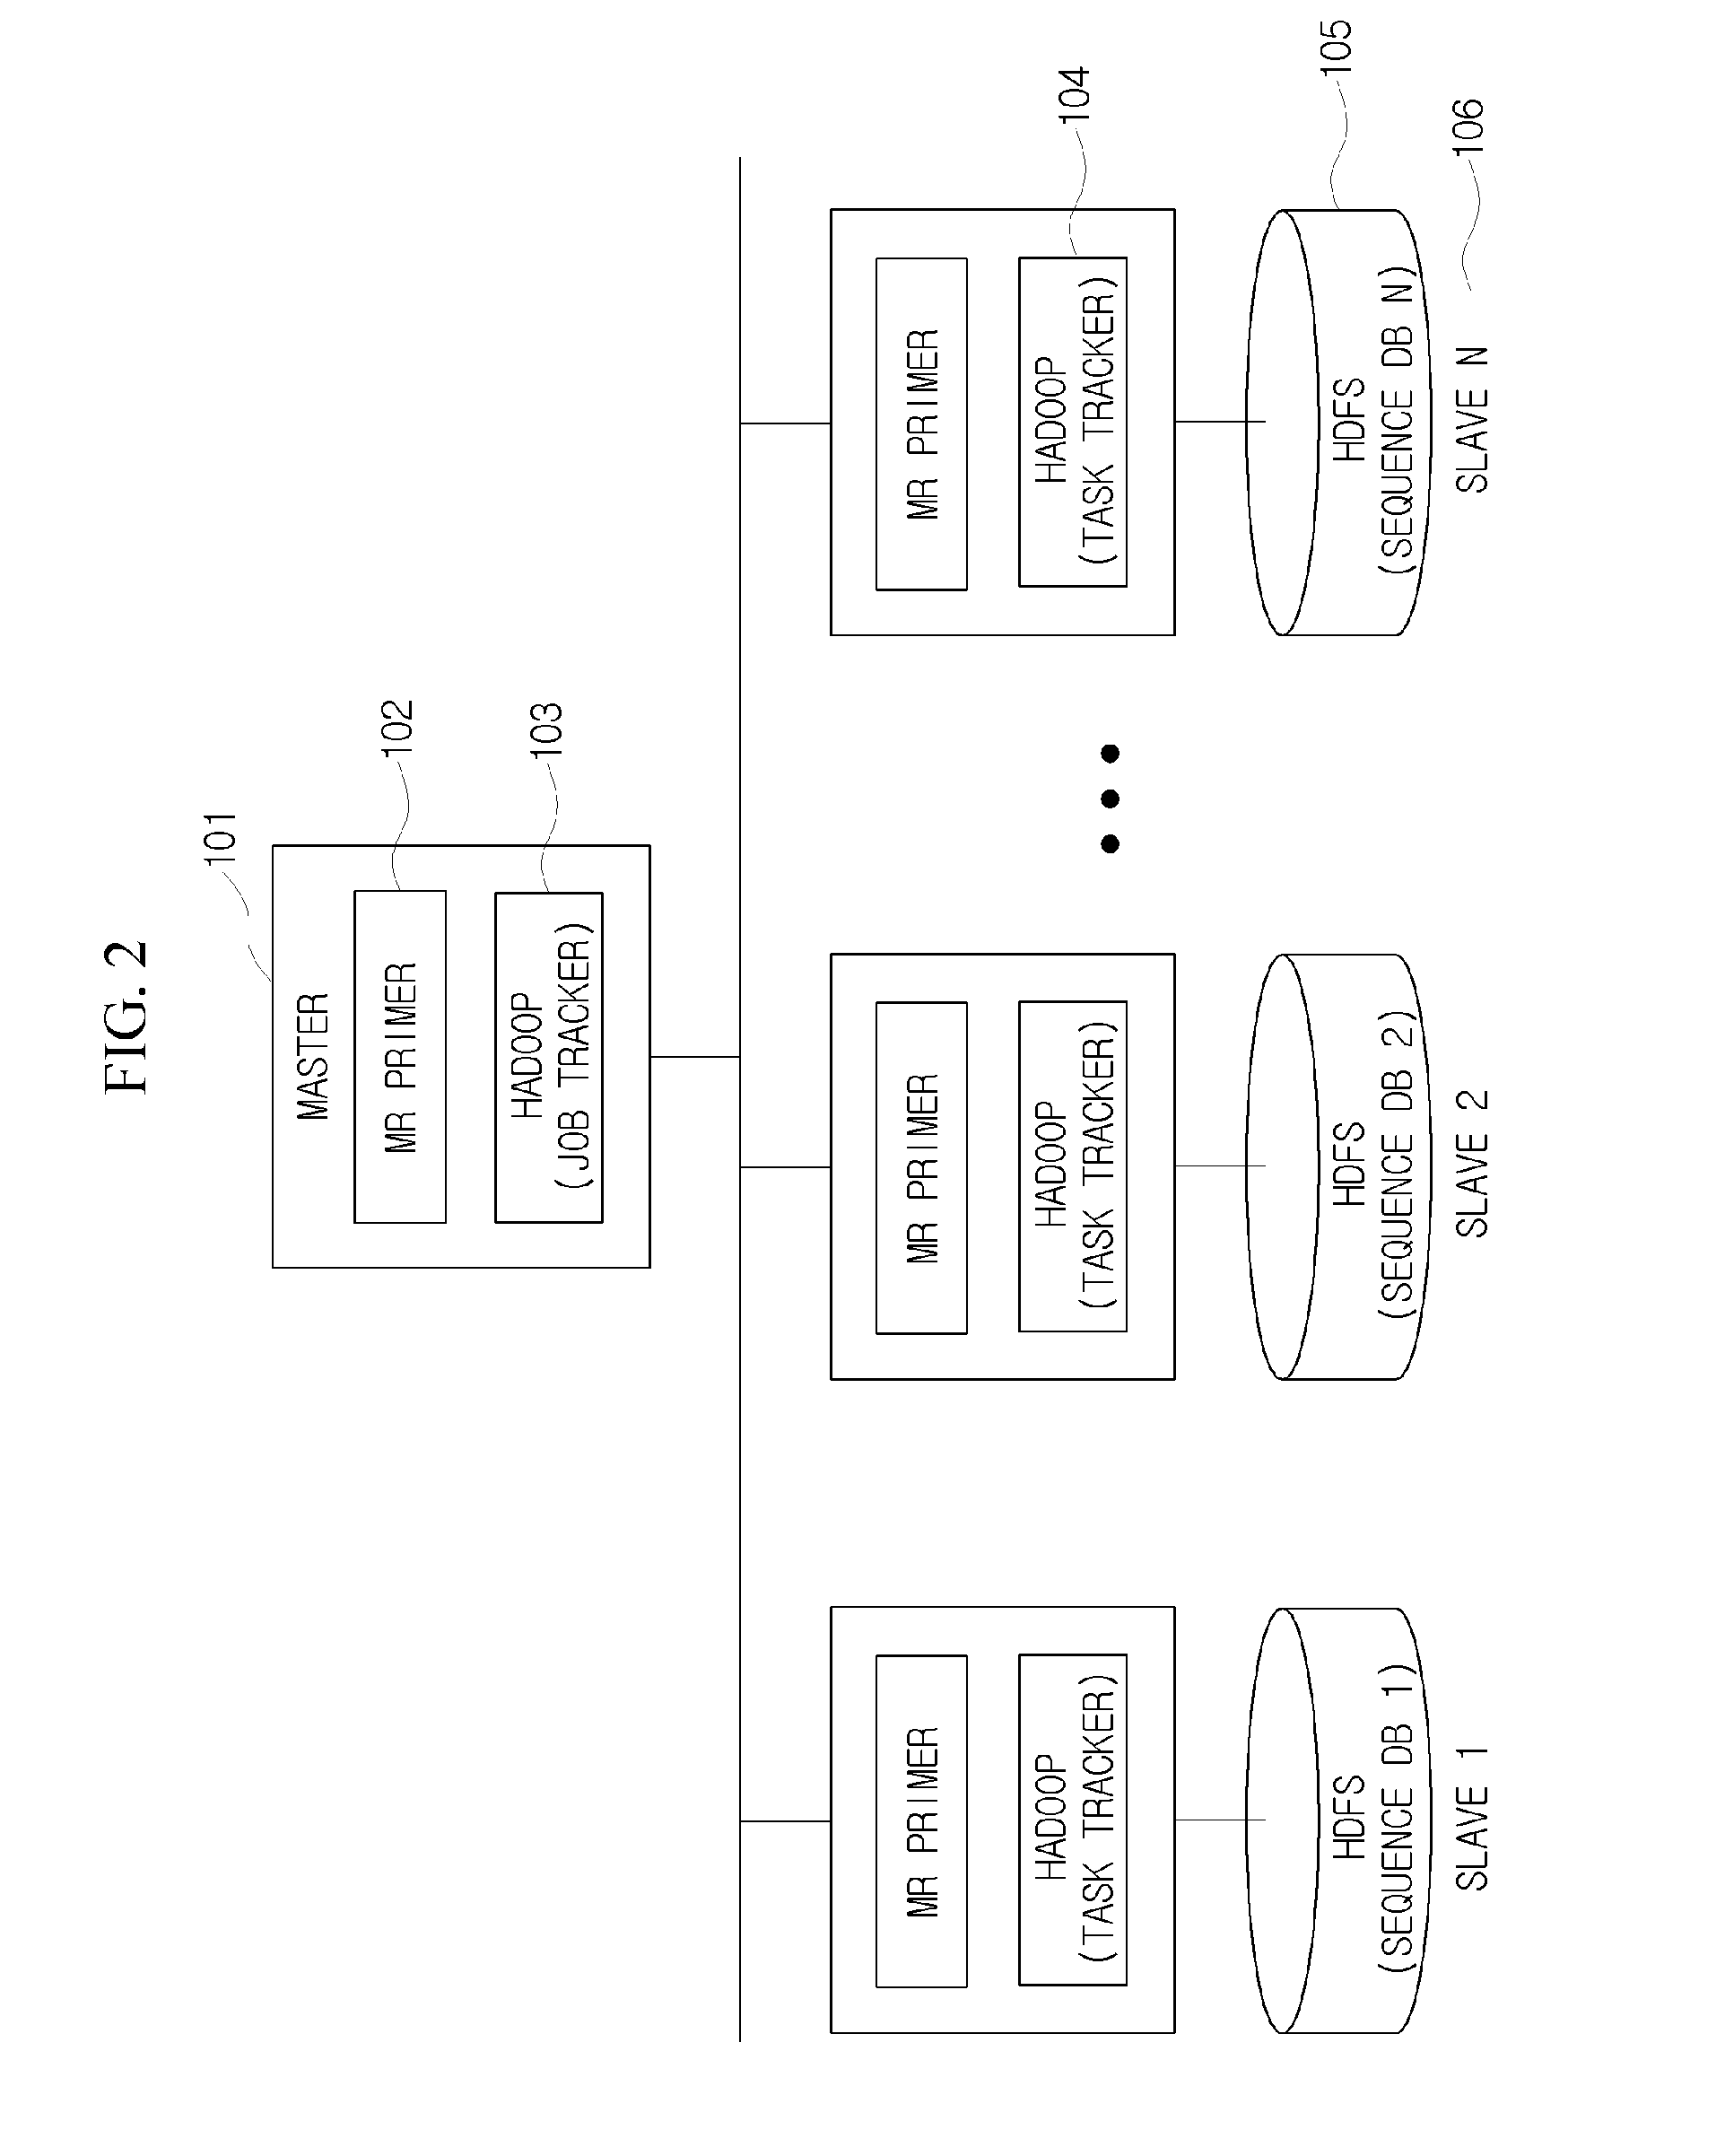 Method for thoroughly designing valid and ranked primers for genome-scale DNA sequence database